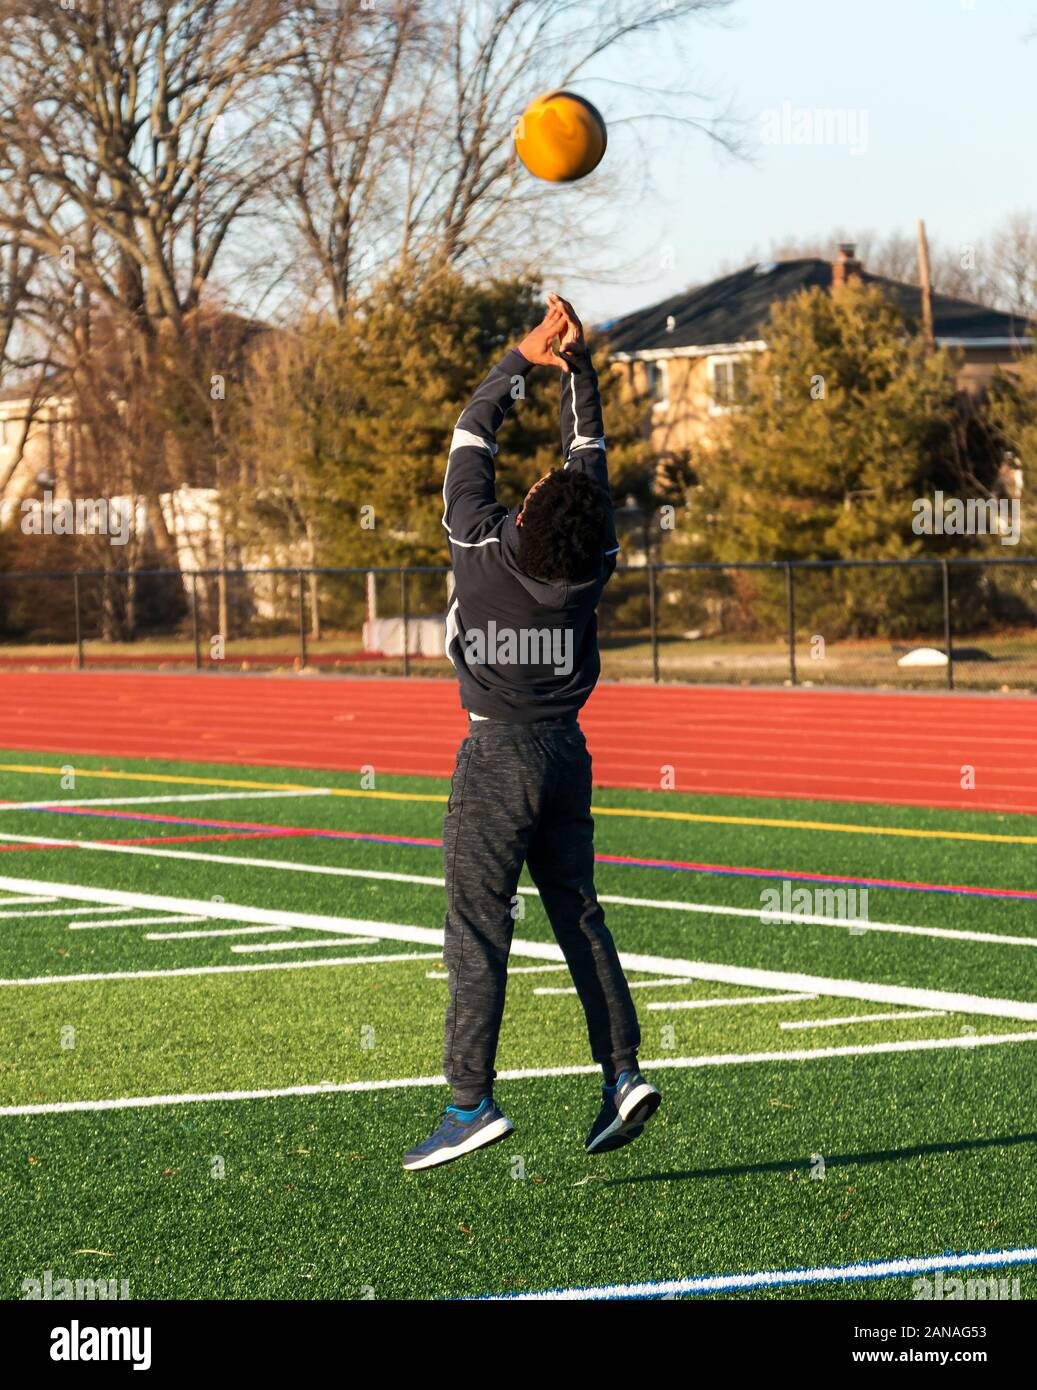 A high school track and field athlete is jumping in the air while throwing a medicine ball over his head backwards on a green turf field. Stock Photo